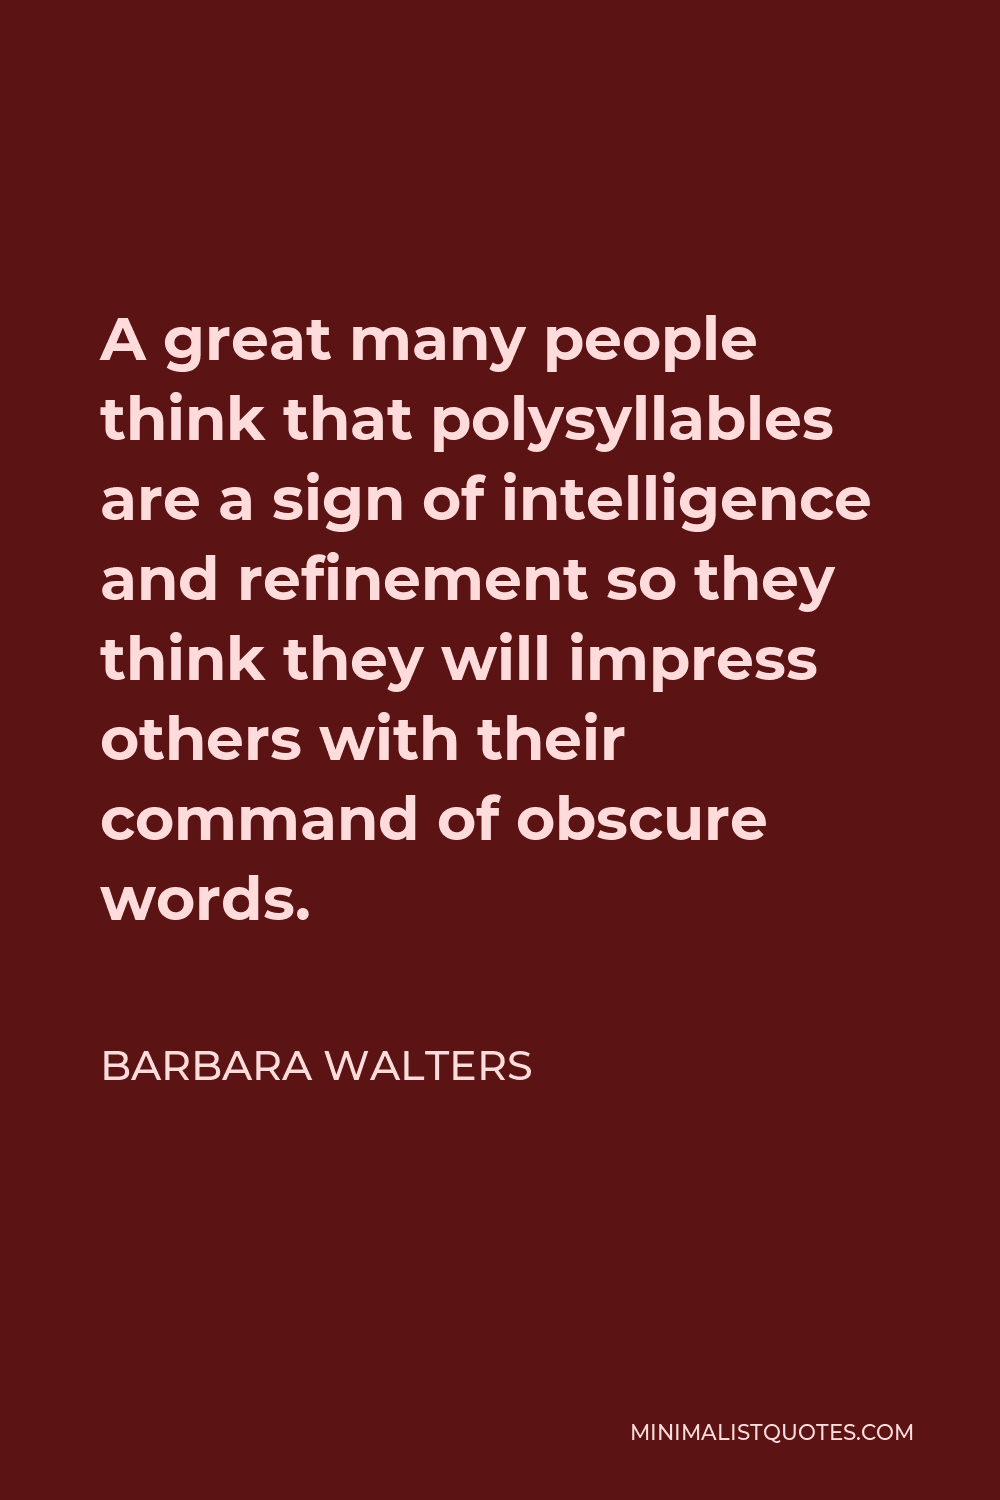 Barbara Walters Quote - A great many people think that polysyllables are a sign of intelligence and refinement so they think they will impress others with their command of obscure words.